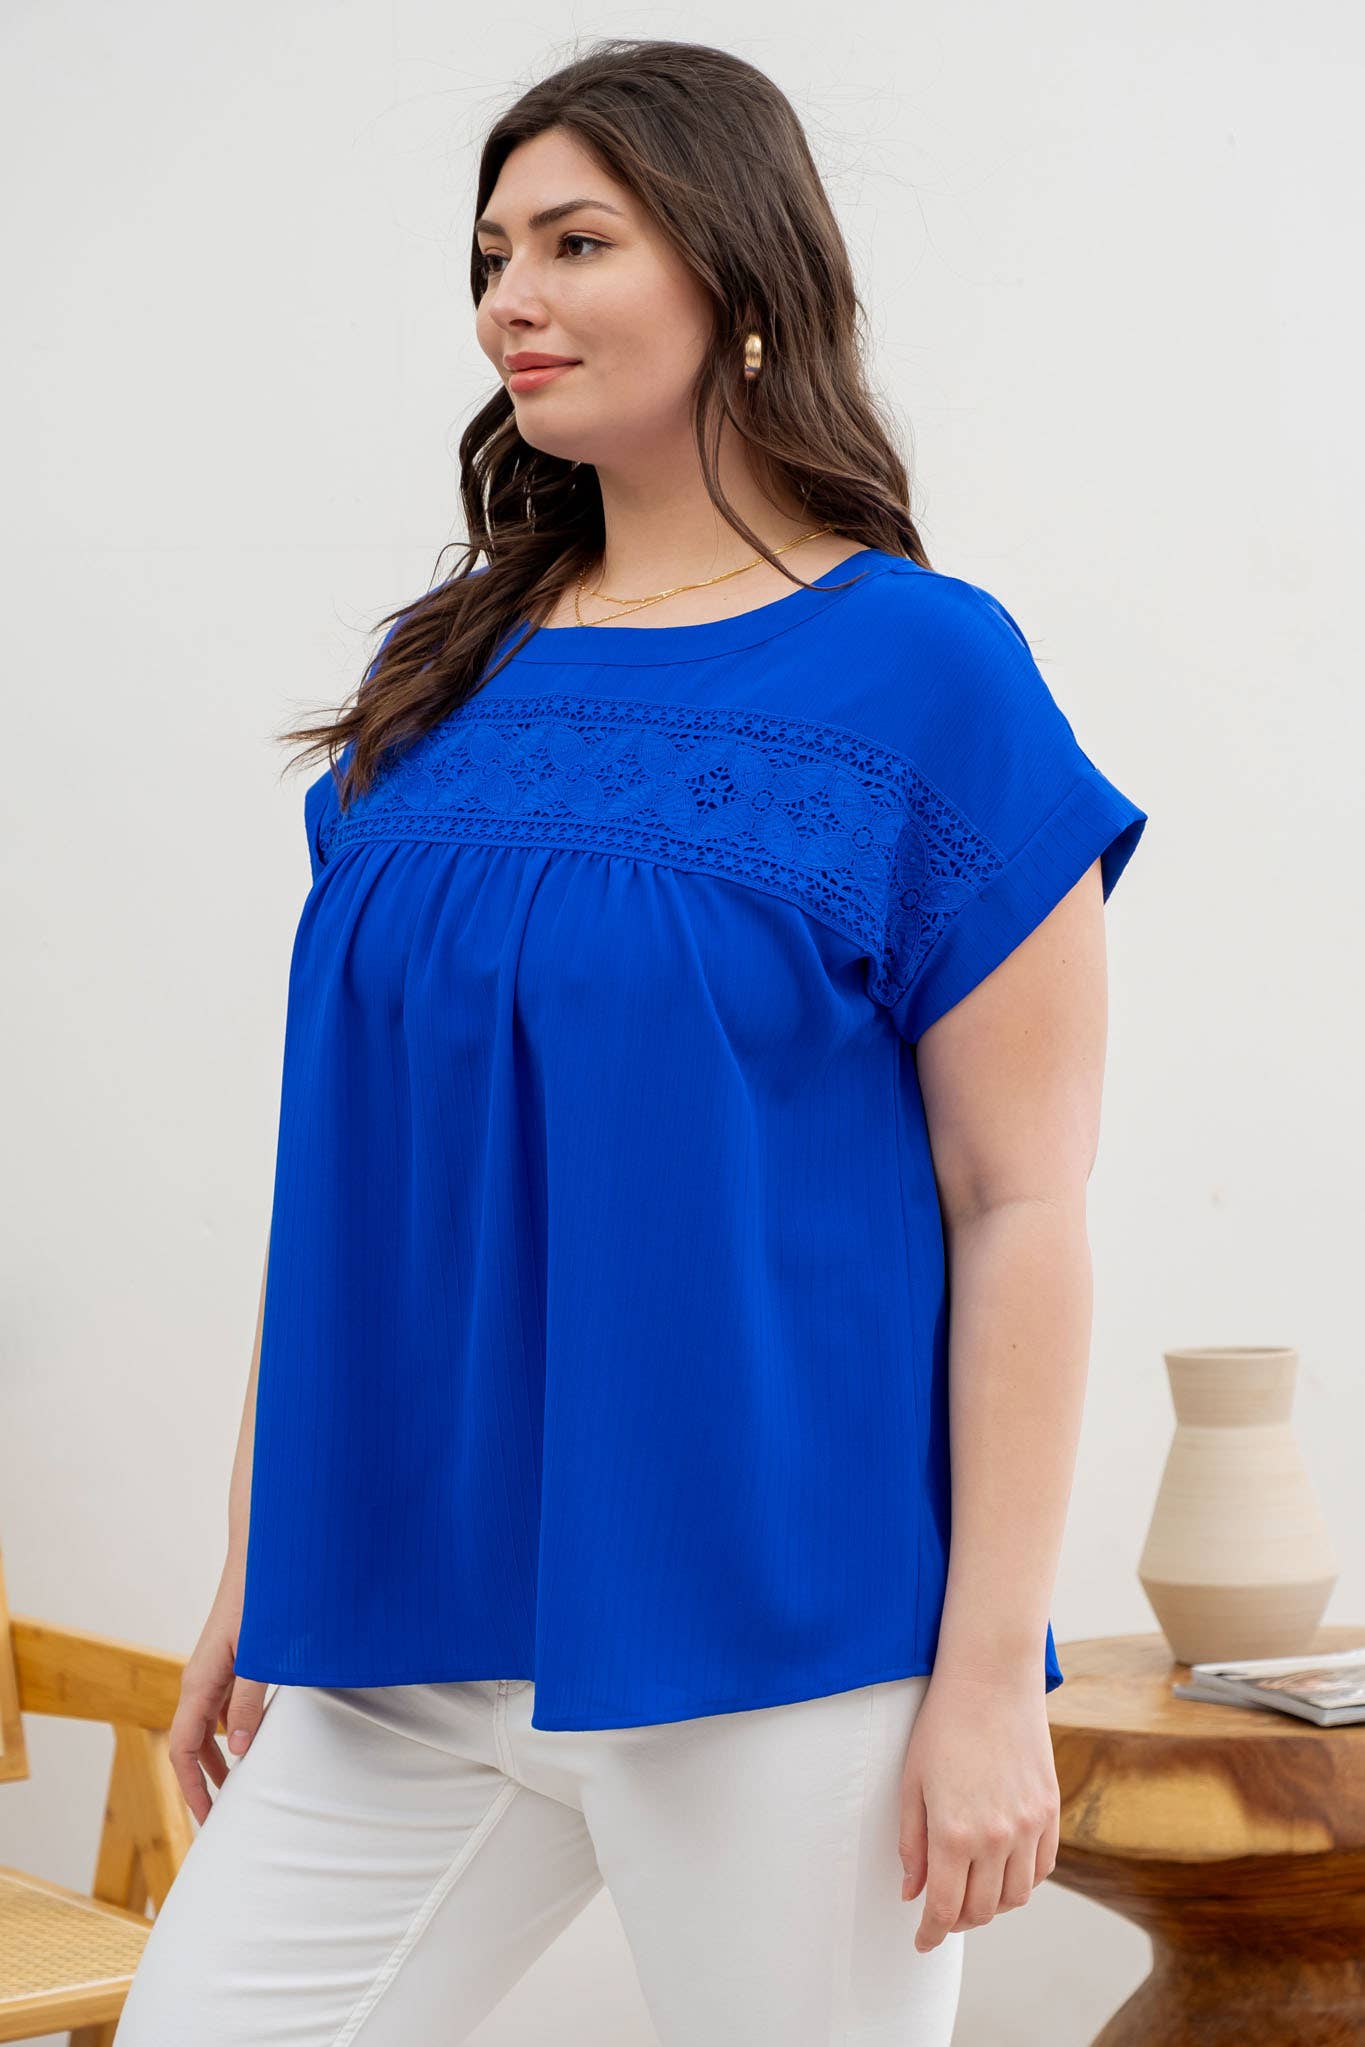 Floral Eyelet Detail Woven Top Plus - White and Royal Blue